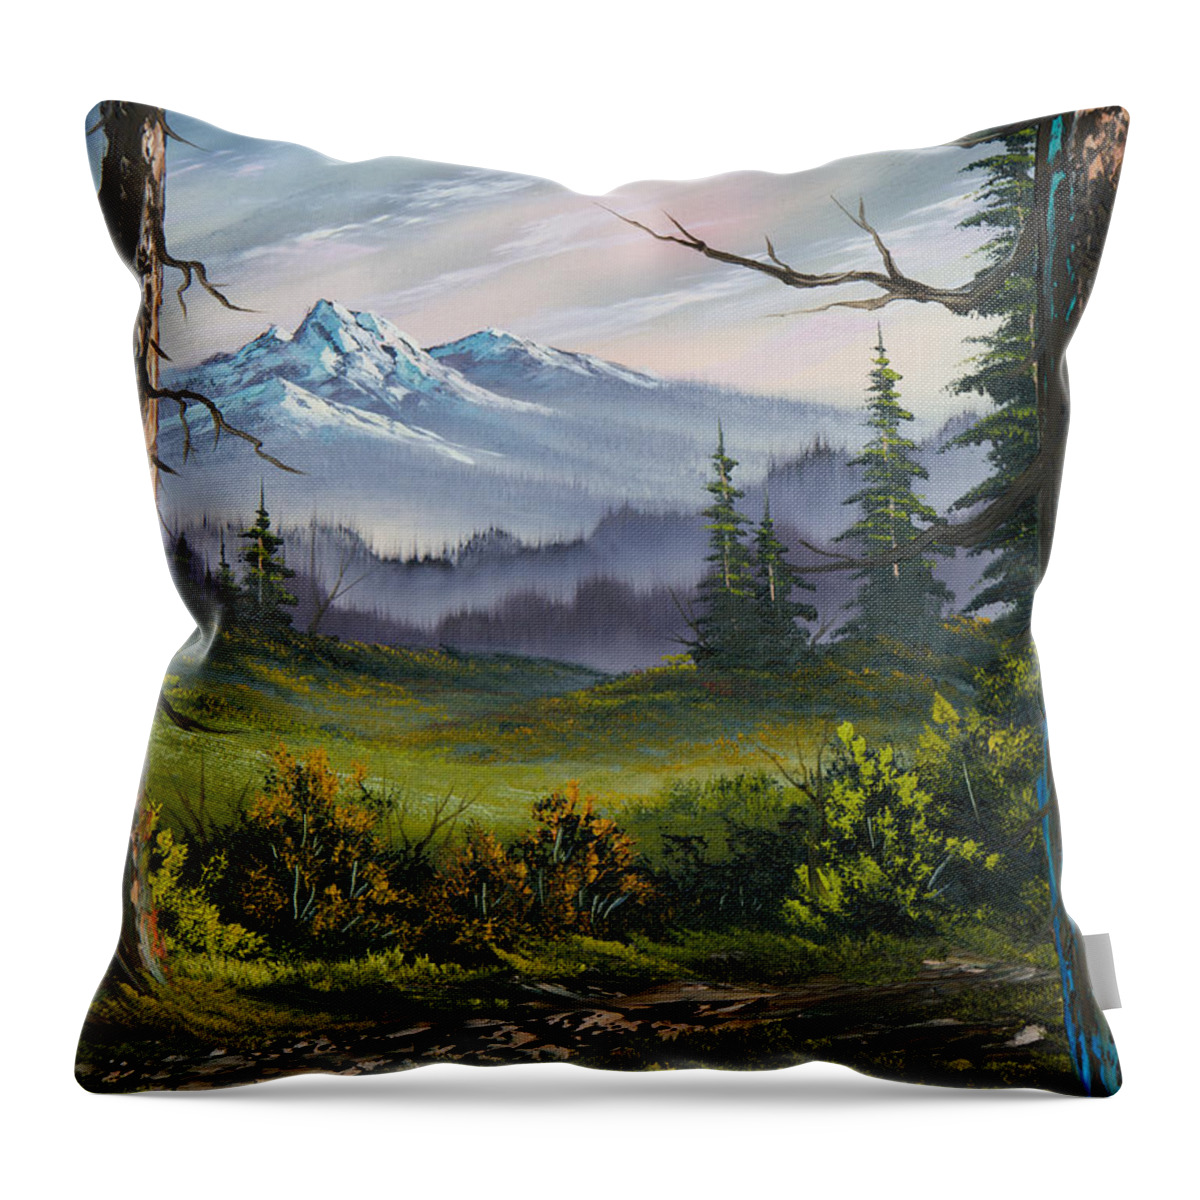 Landscape Throw Pillow featuring the painting Meadow View by Chris Steele